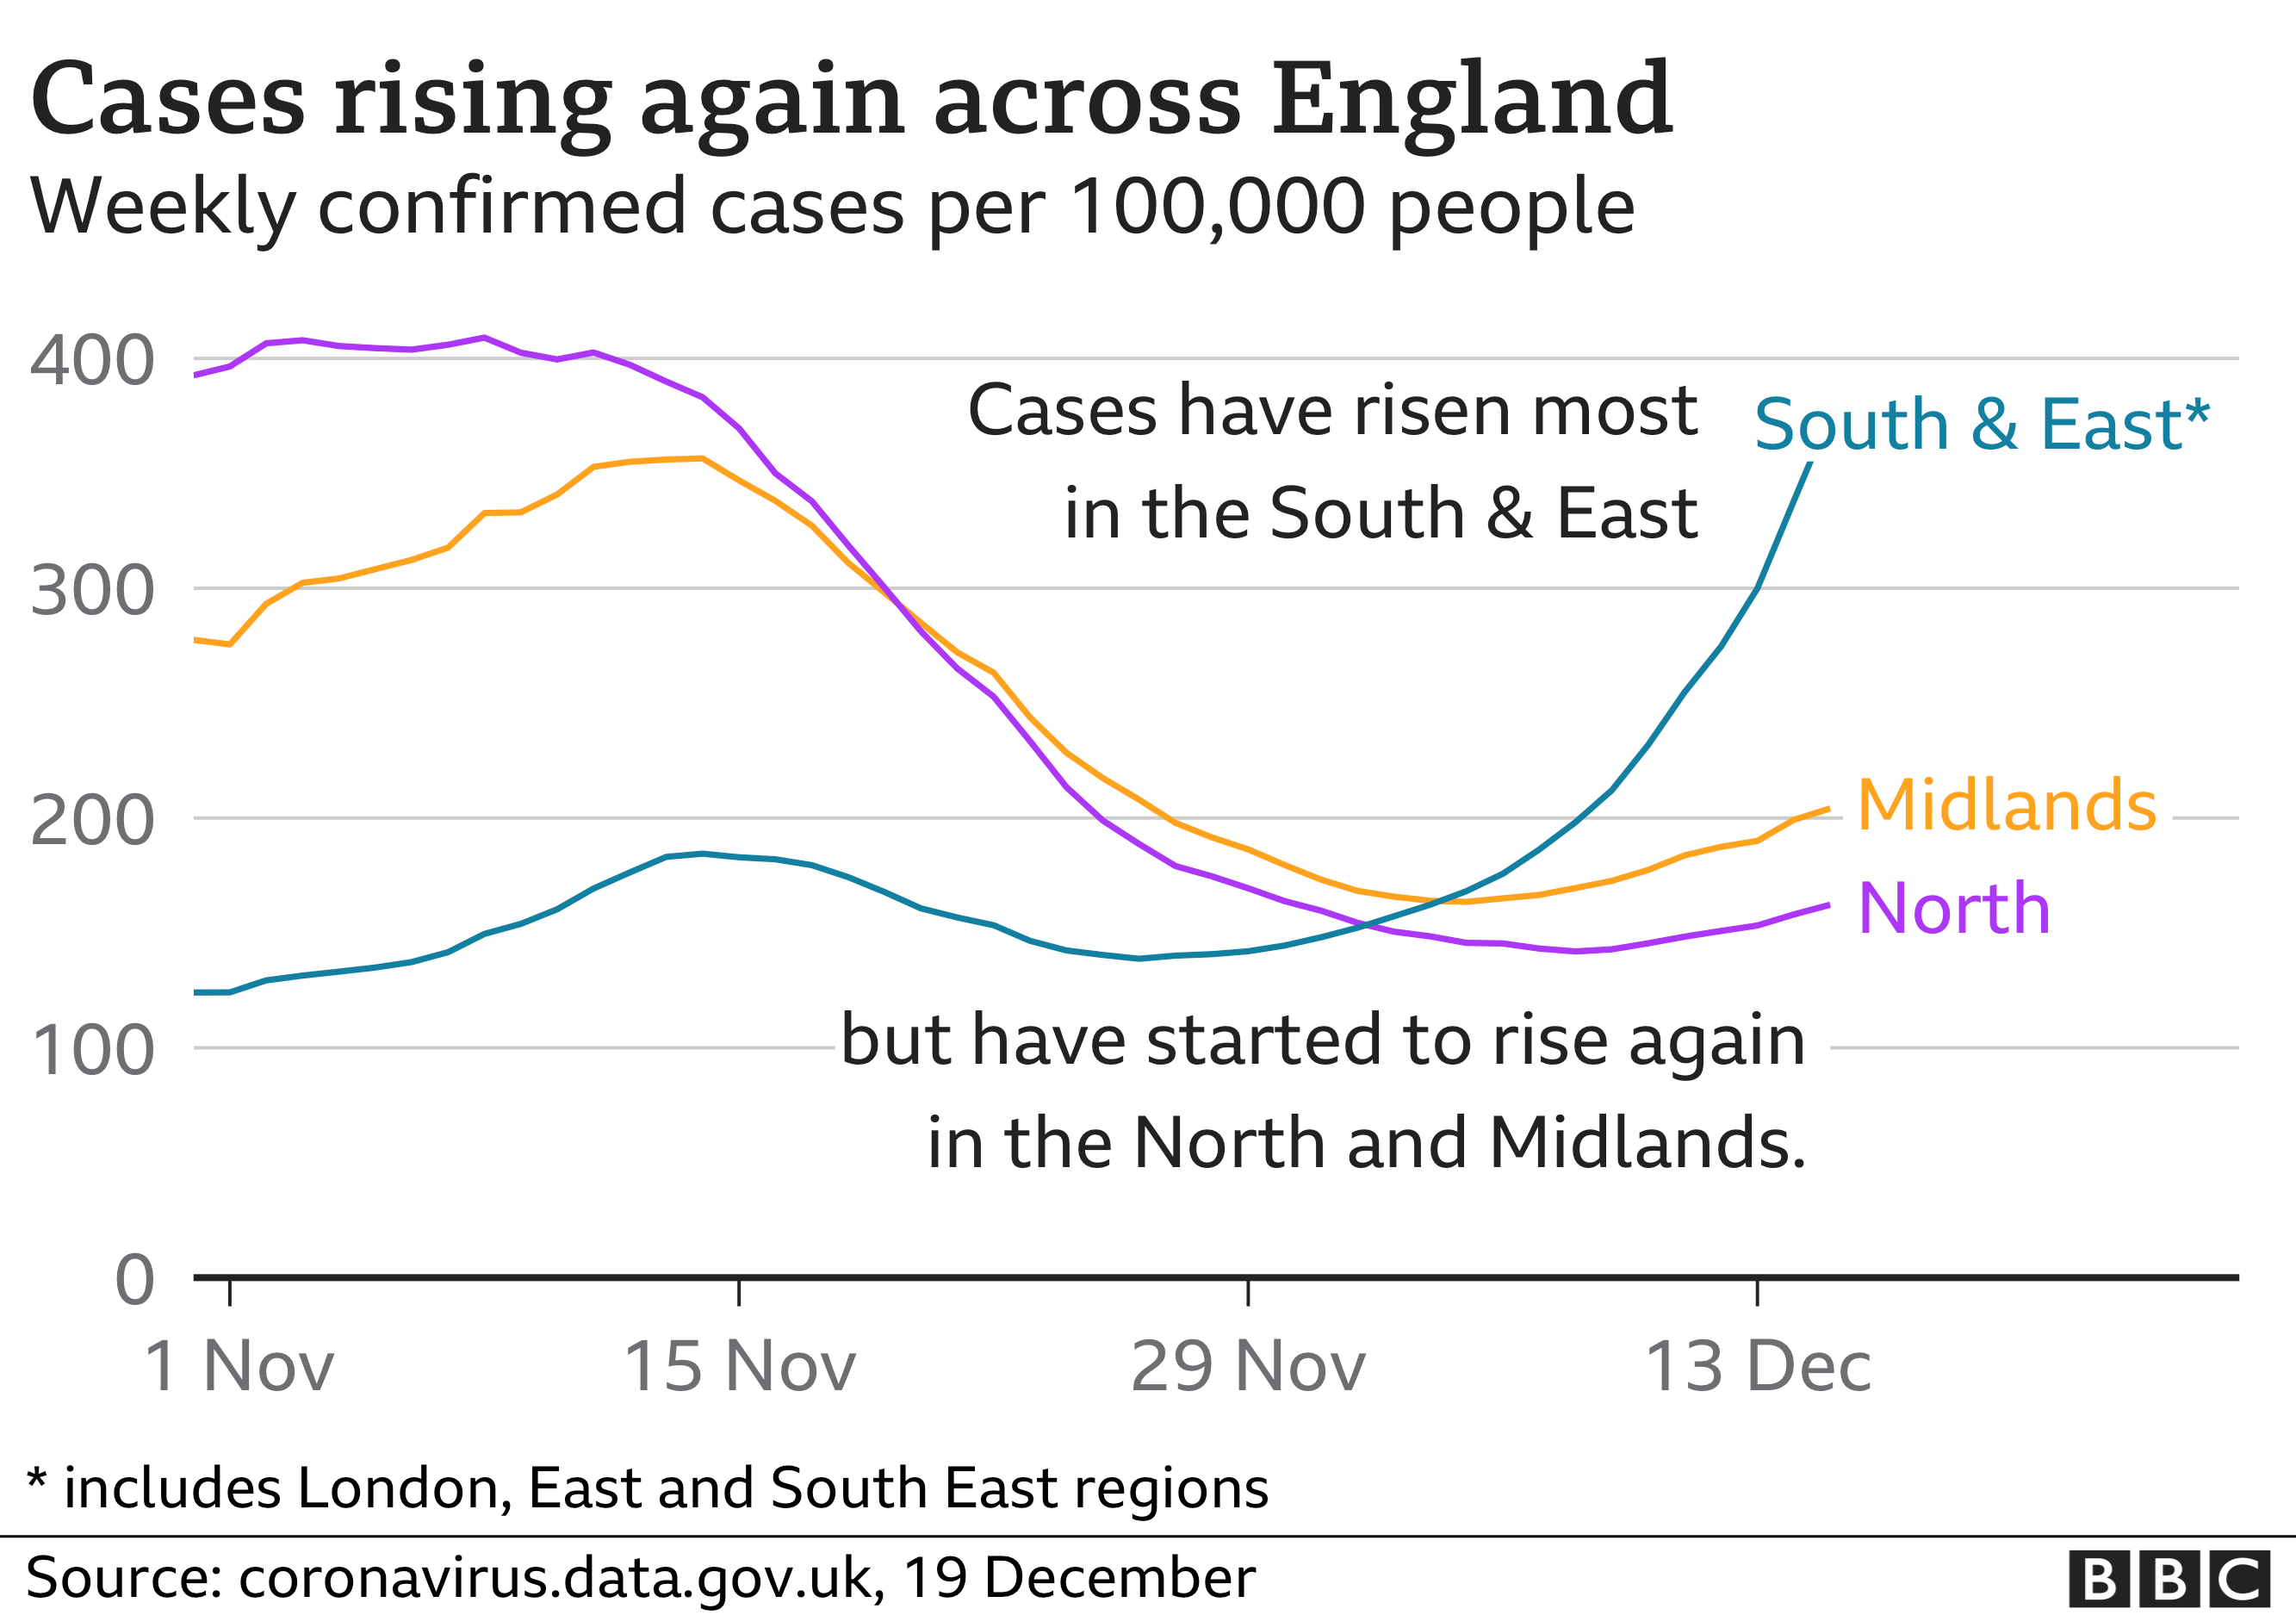 Chart showing cases rising across England